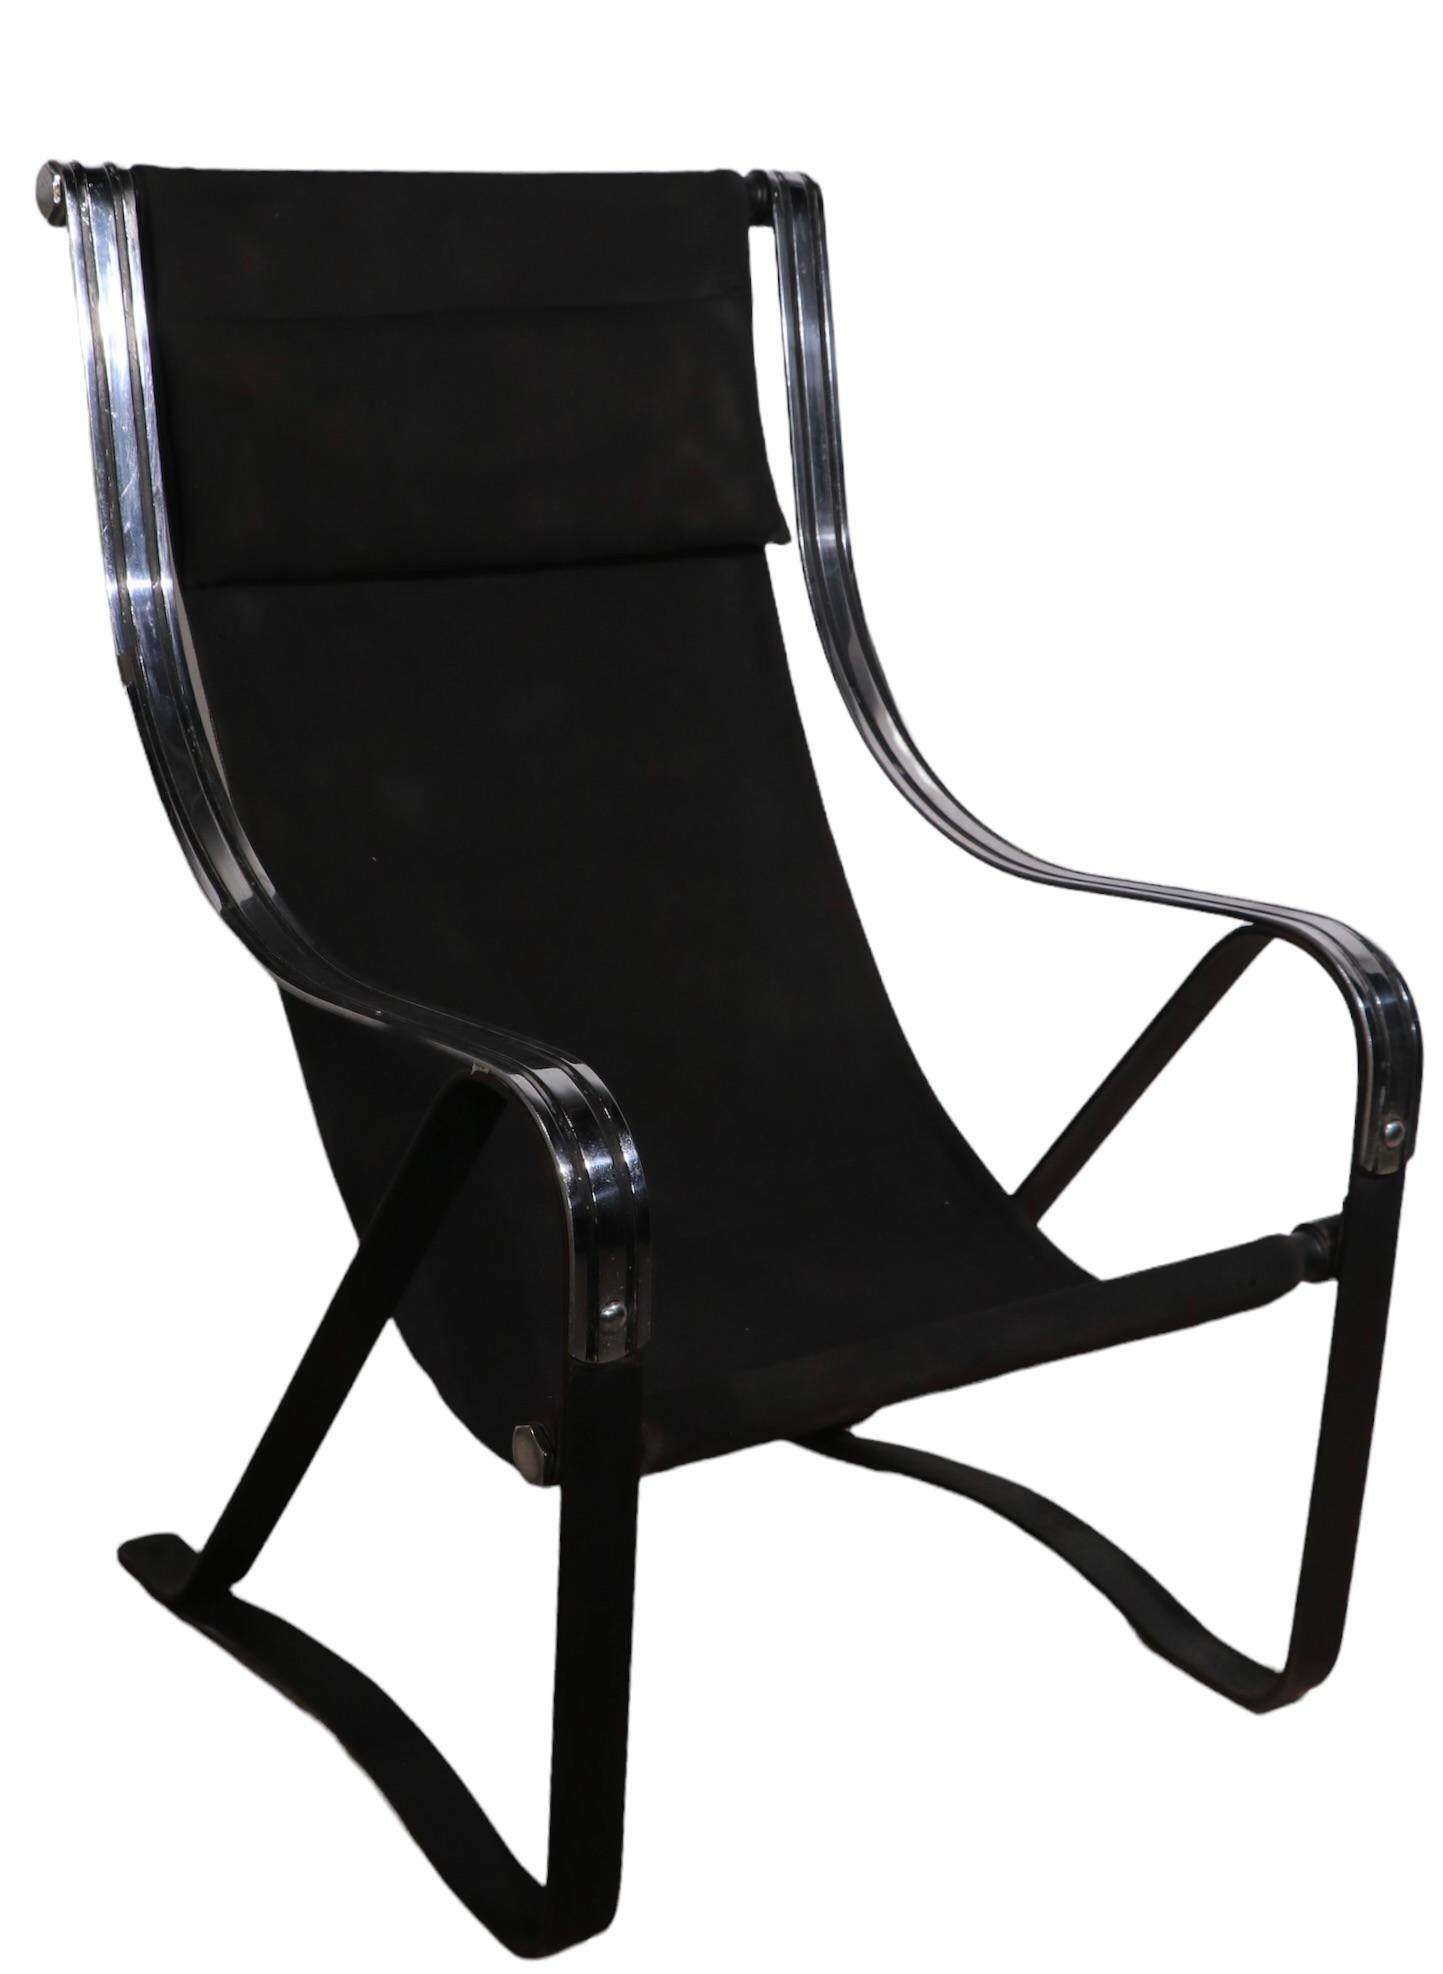 20th Century Art Deco Machine Age Sling Chair by McKay Craft Furniture Company For Sale